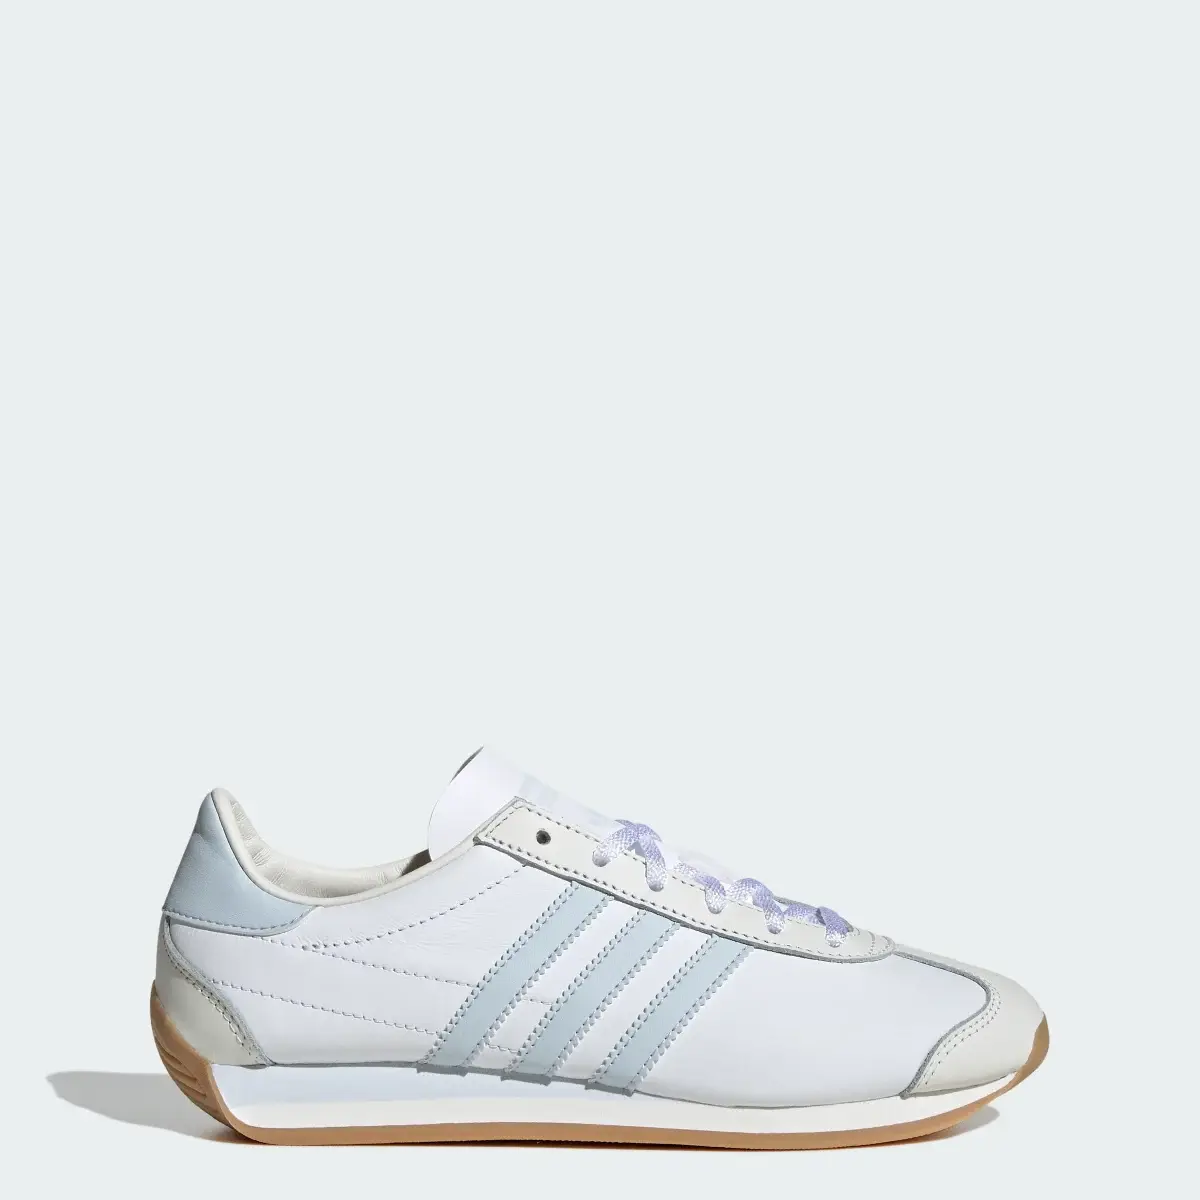 Adidas Chaussure Country OG. 1